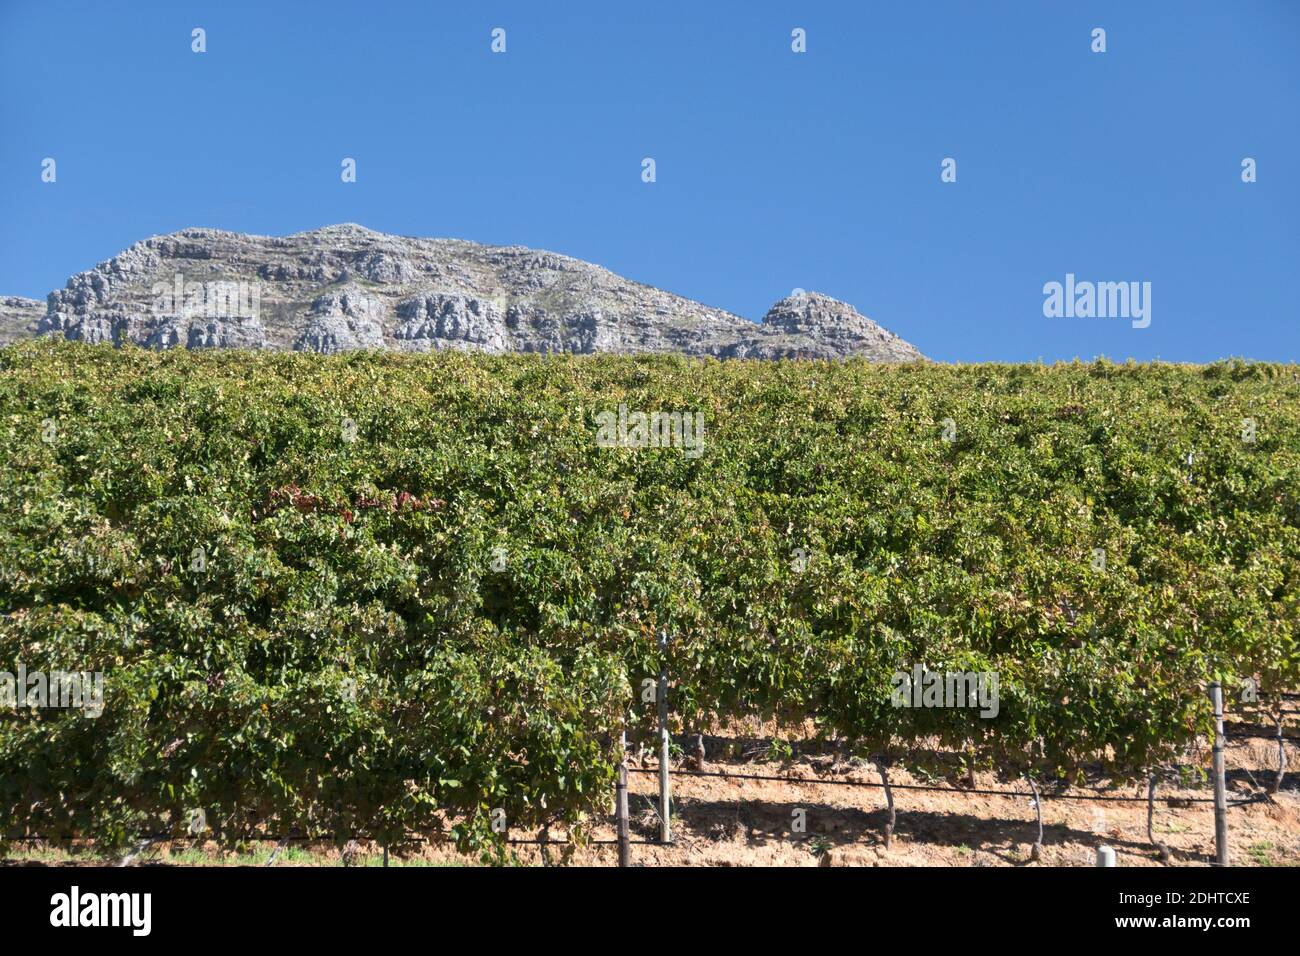 Vines grow on wine estates below Table Mountain, in the suburb of Constantia, Cape Town, South Africa. Stock Photo